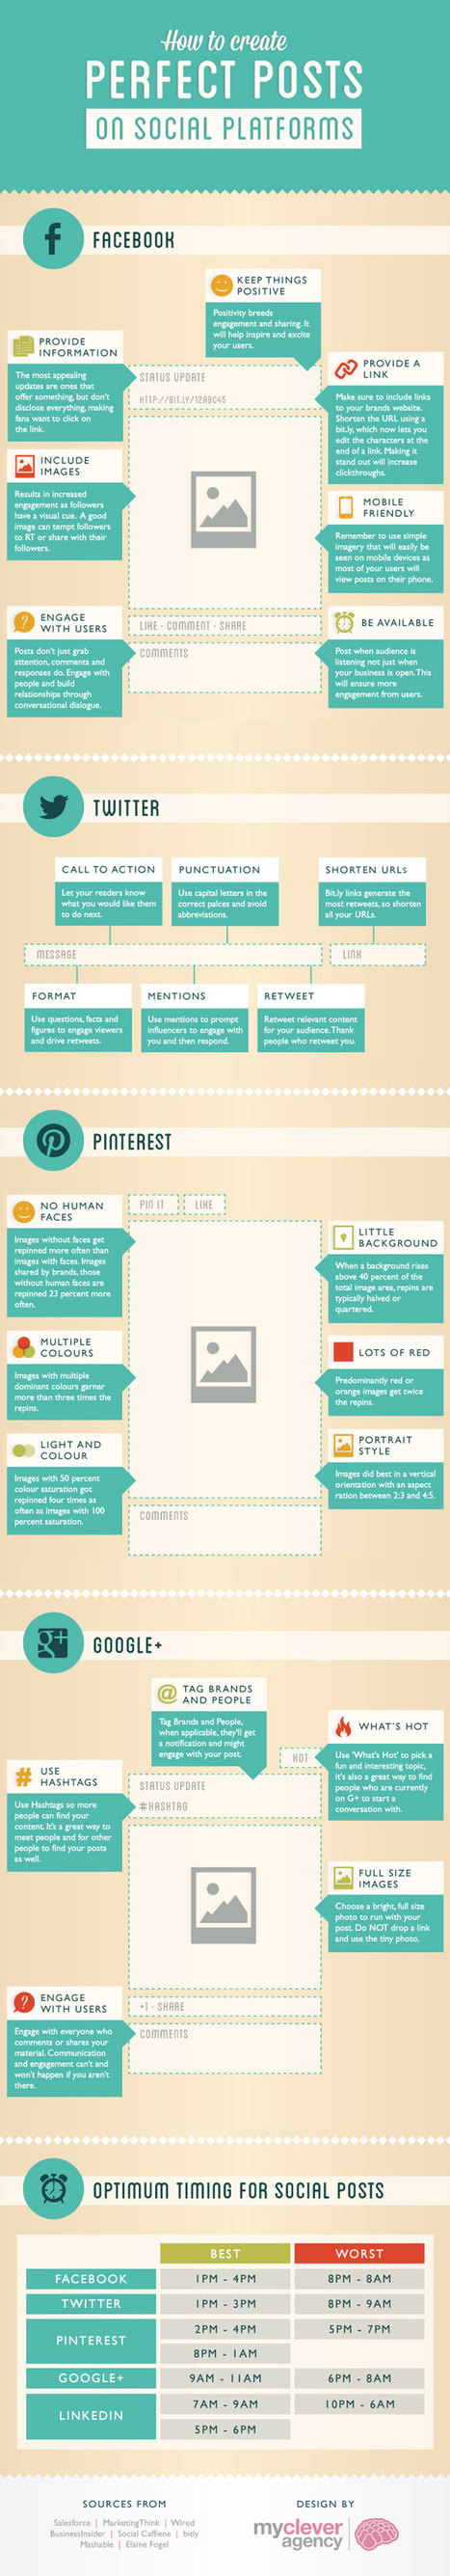 How To Create Effective Posts on the 4 Main Social Sites [Infographic] | Business Improvement and Social media | Scoop.it